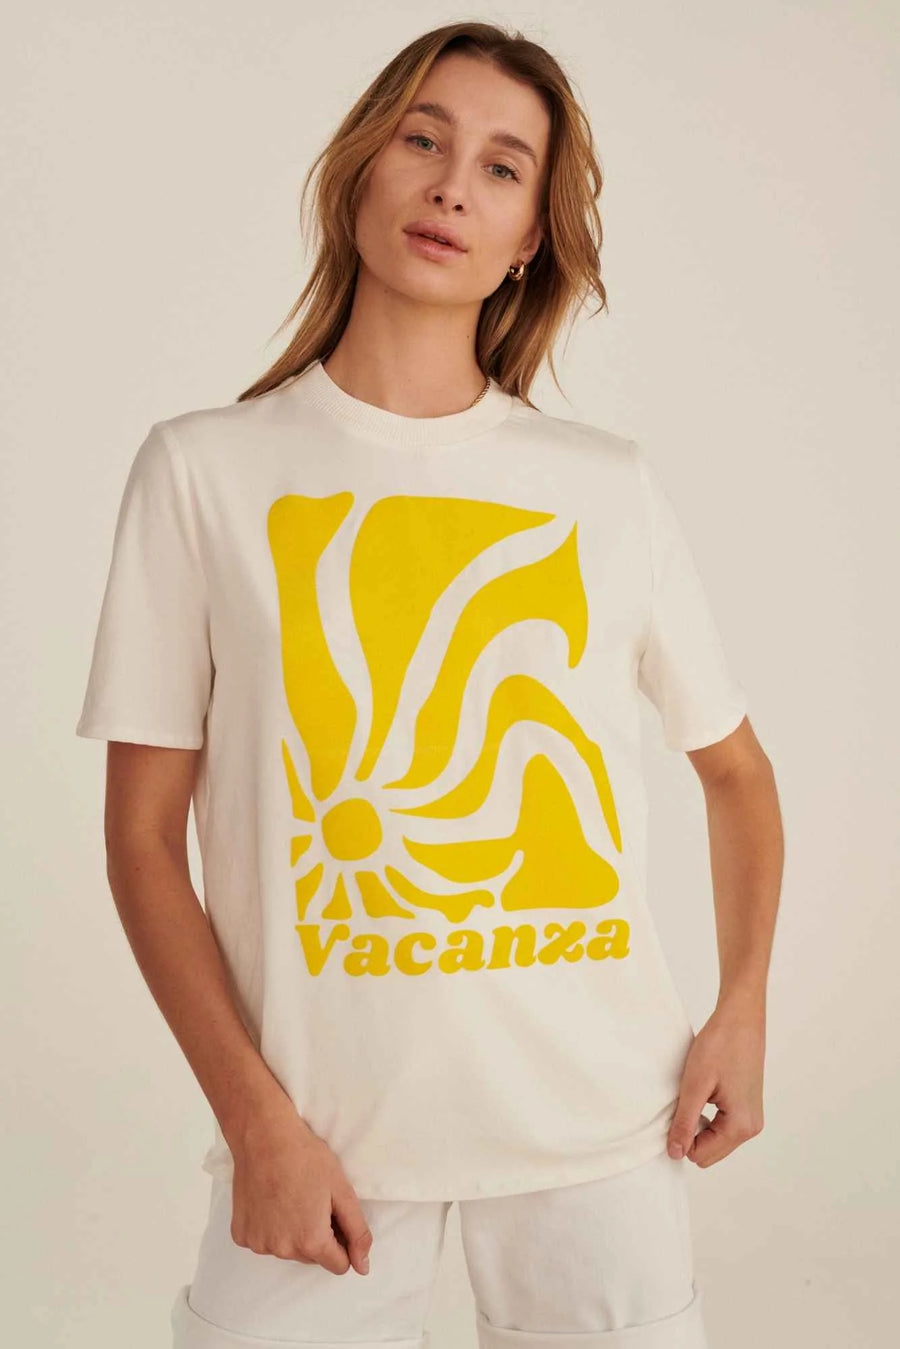 Les Goodies - She Is Sunday Sole Vacanza Top